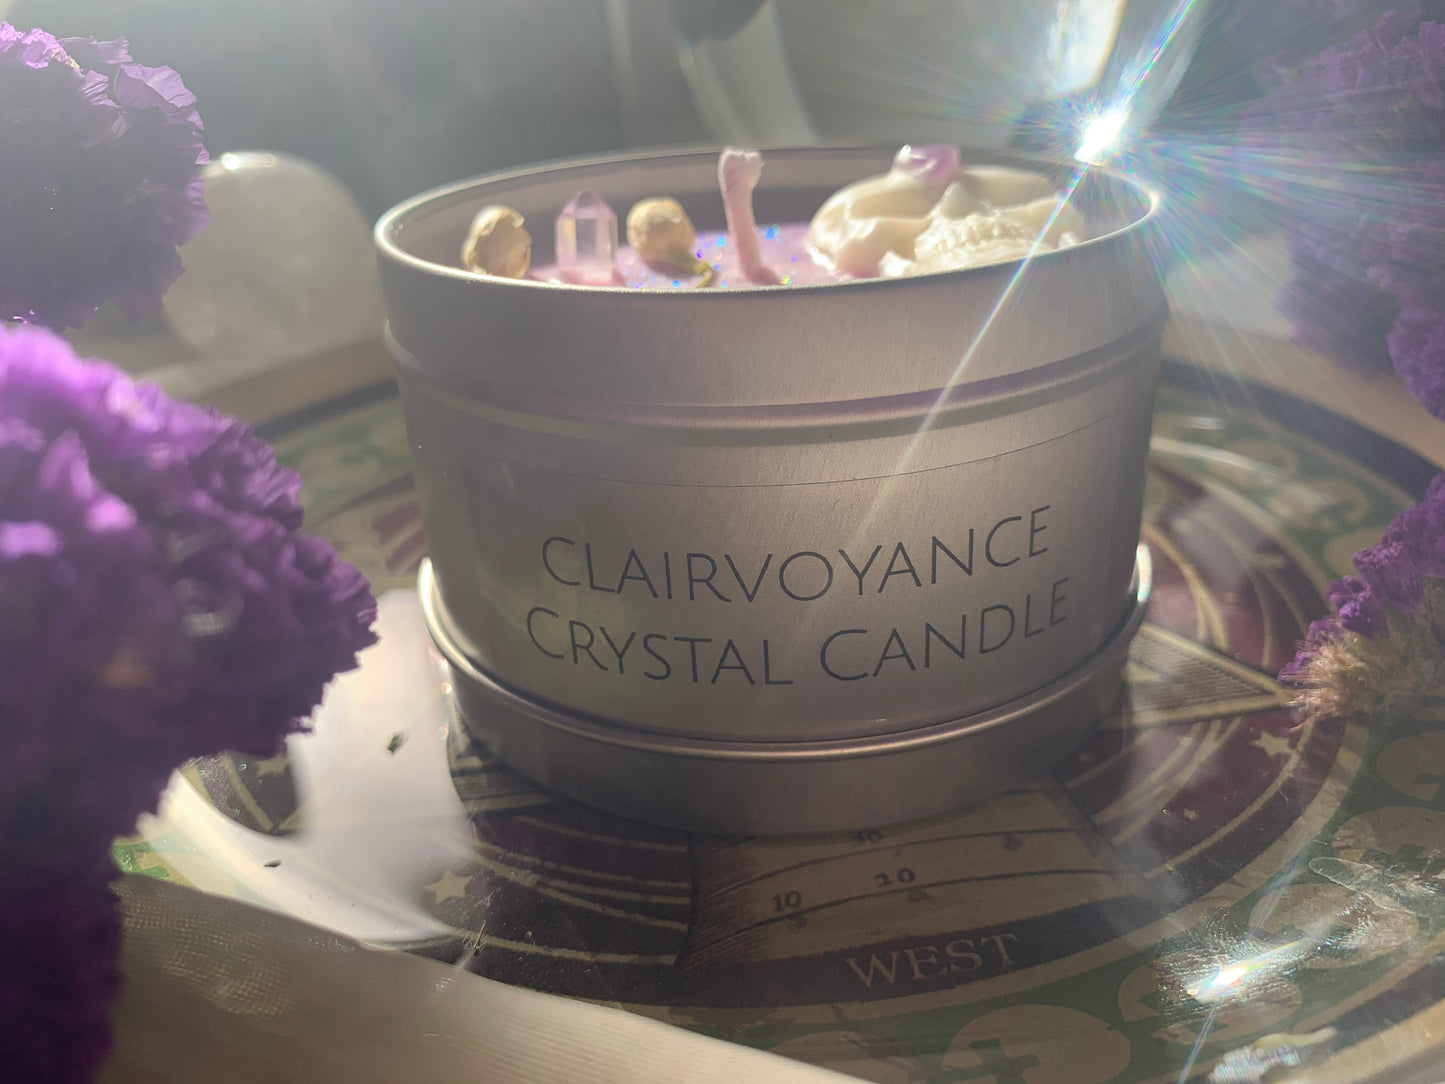 The Clairvoyance Crystal Candle